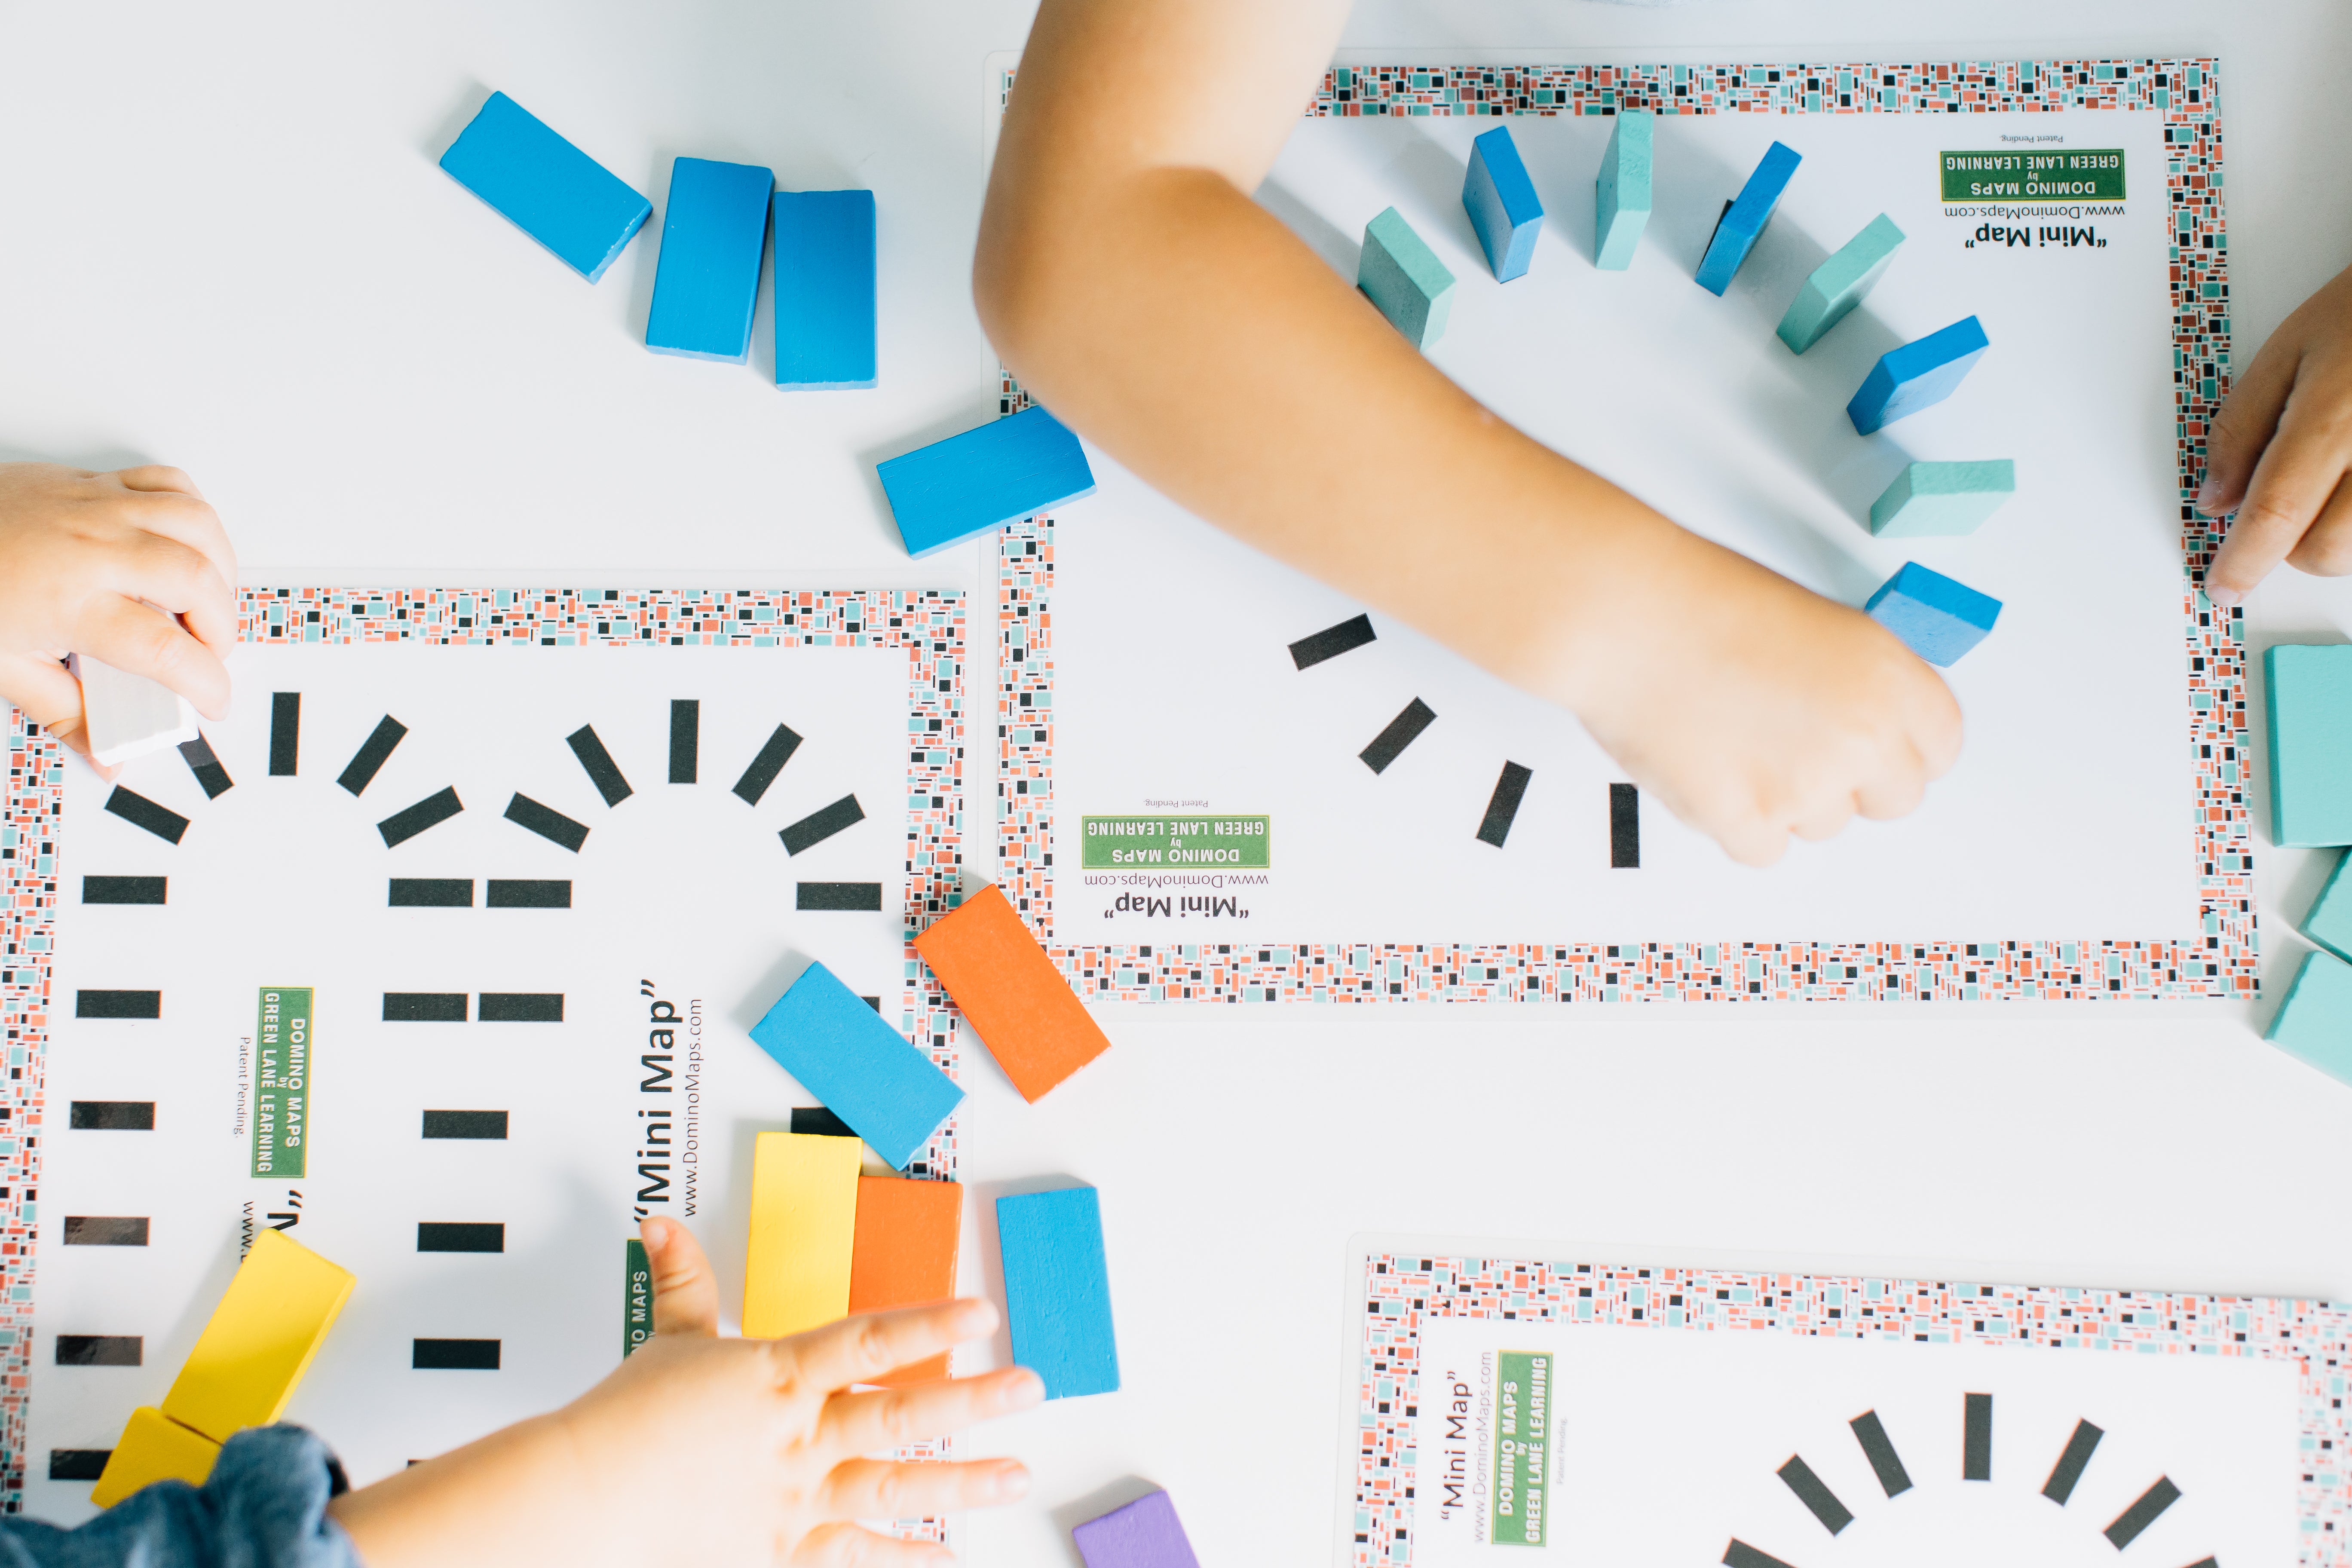 Printable domino maps to use for fine motor skill activities.